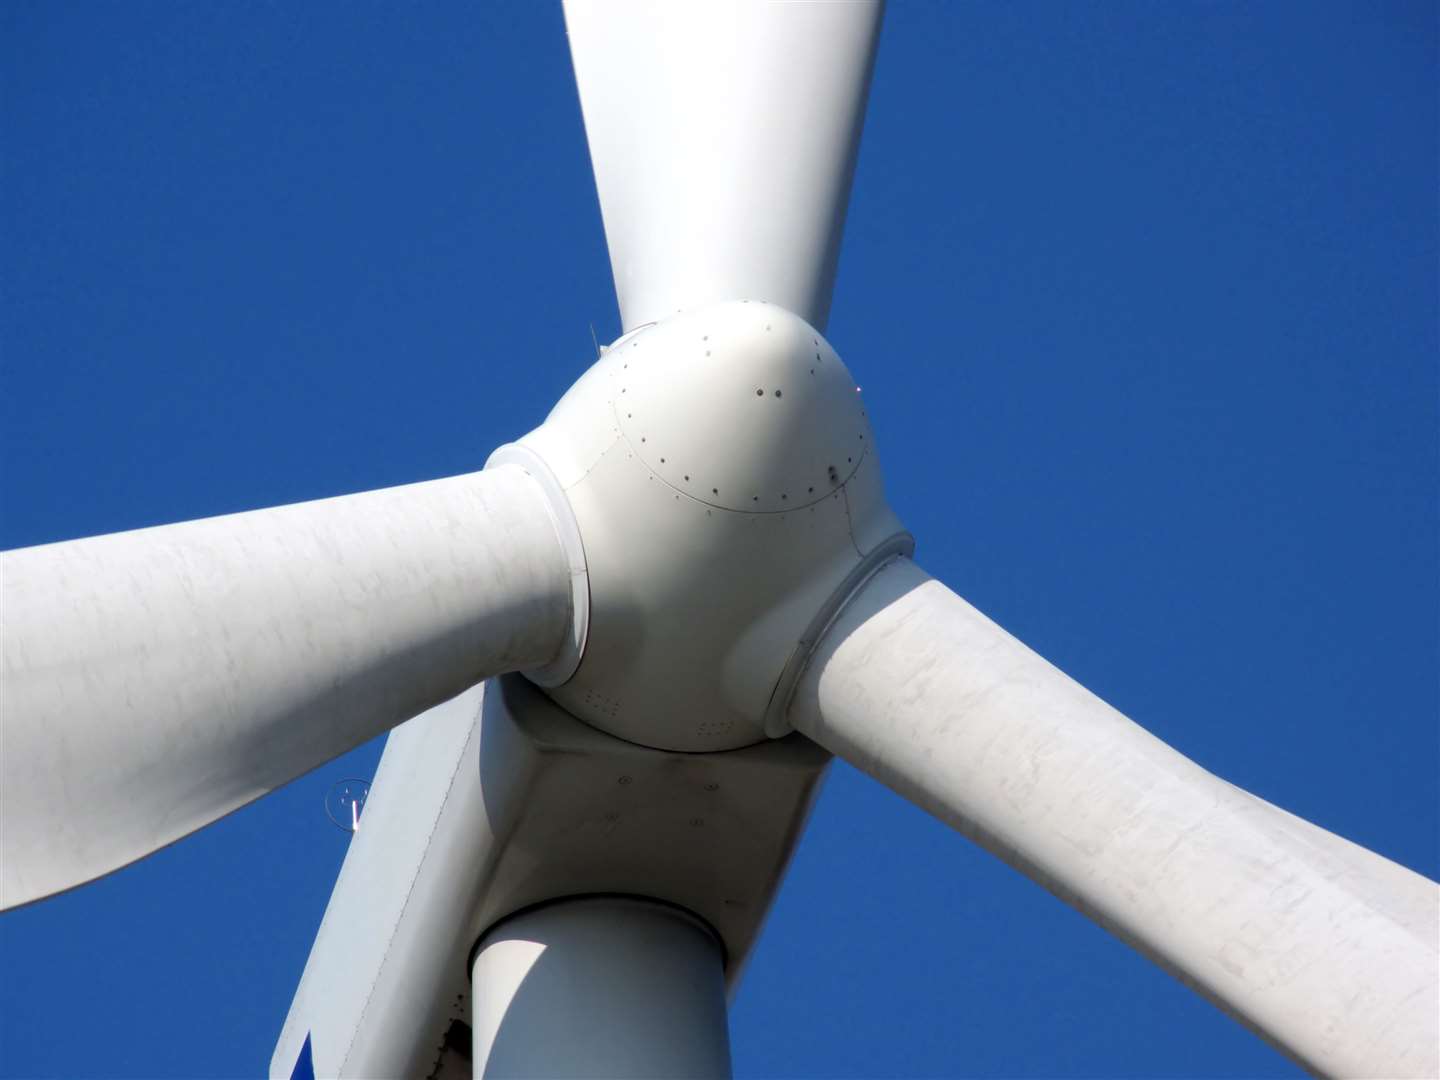 Thirty-seven turbines are planned for the Garvary Wind Farm.